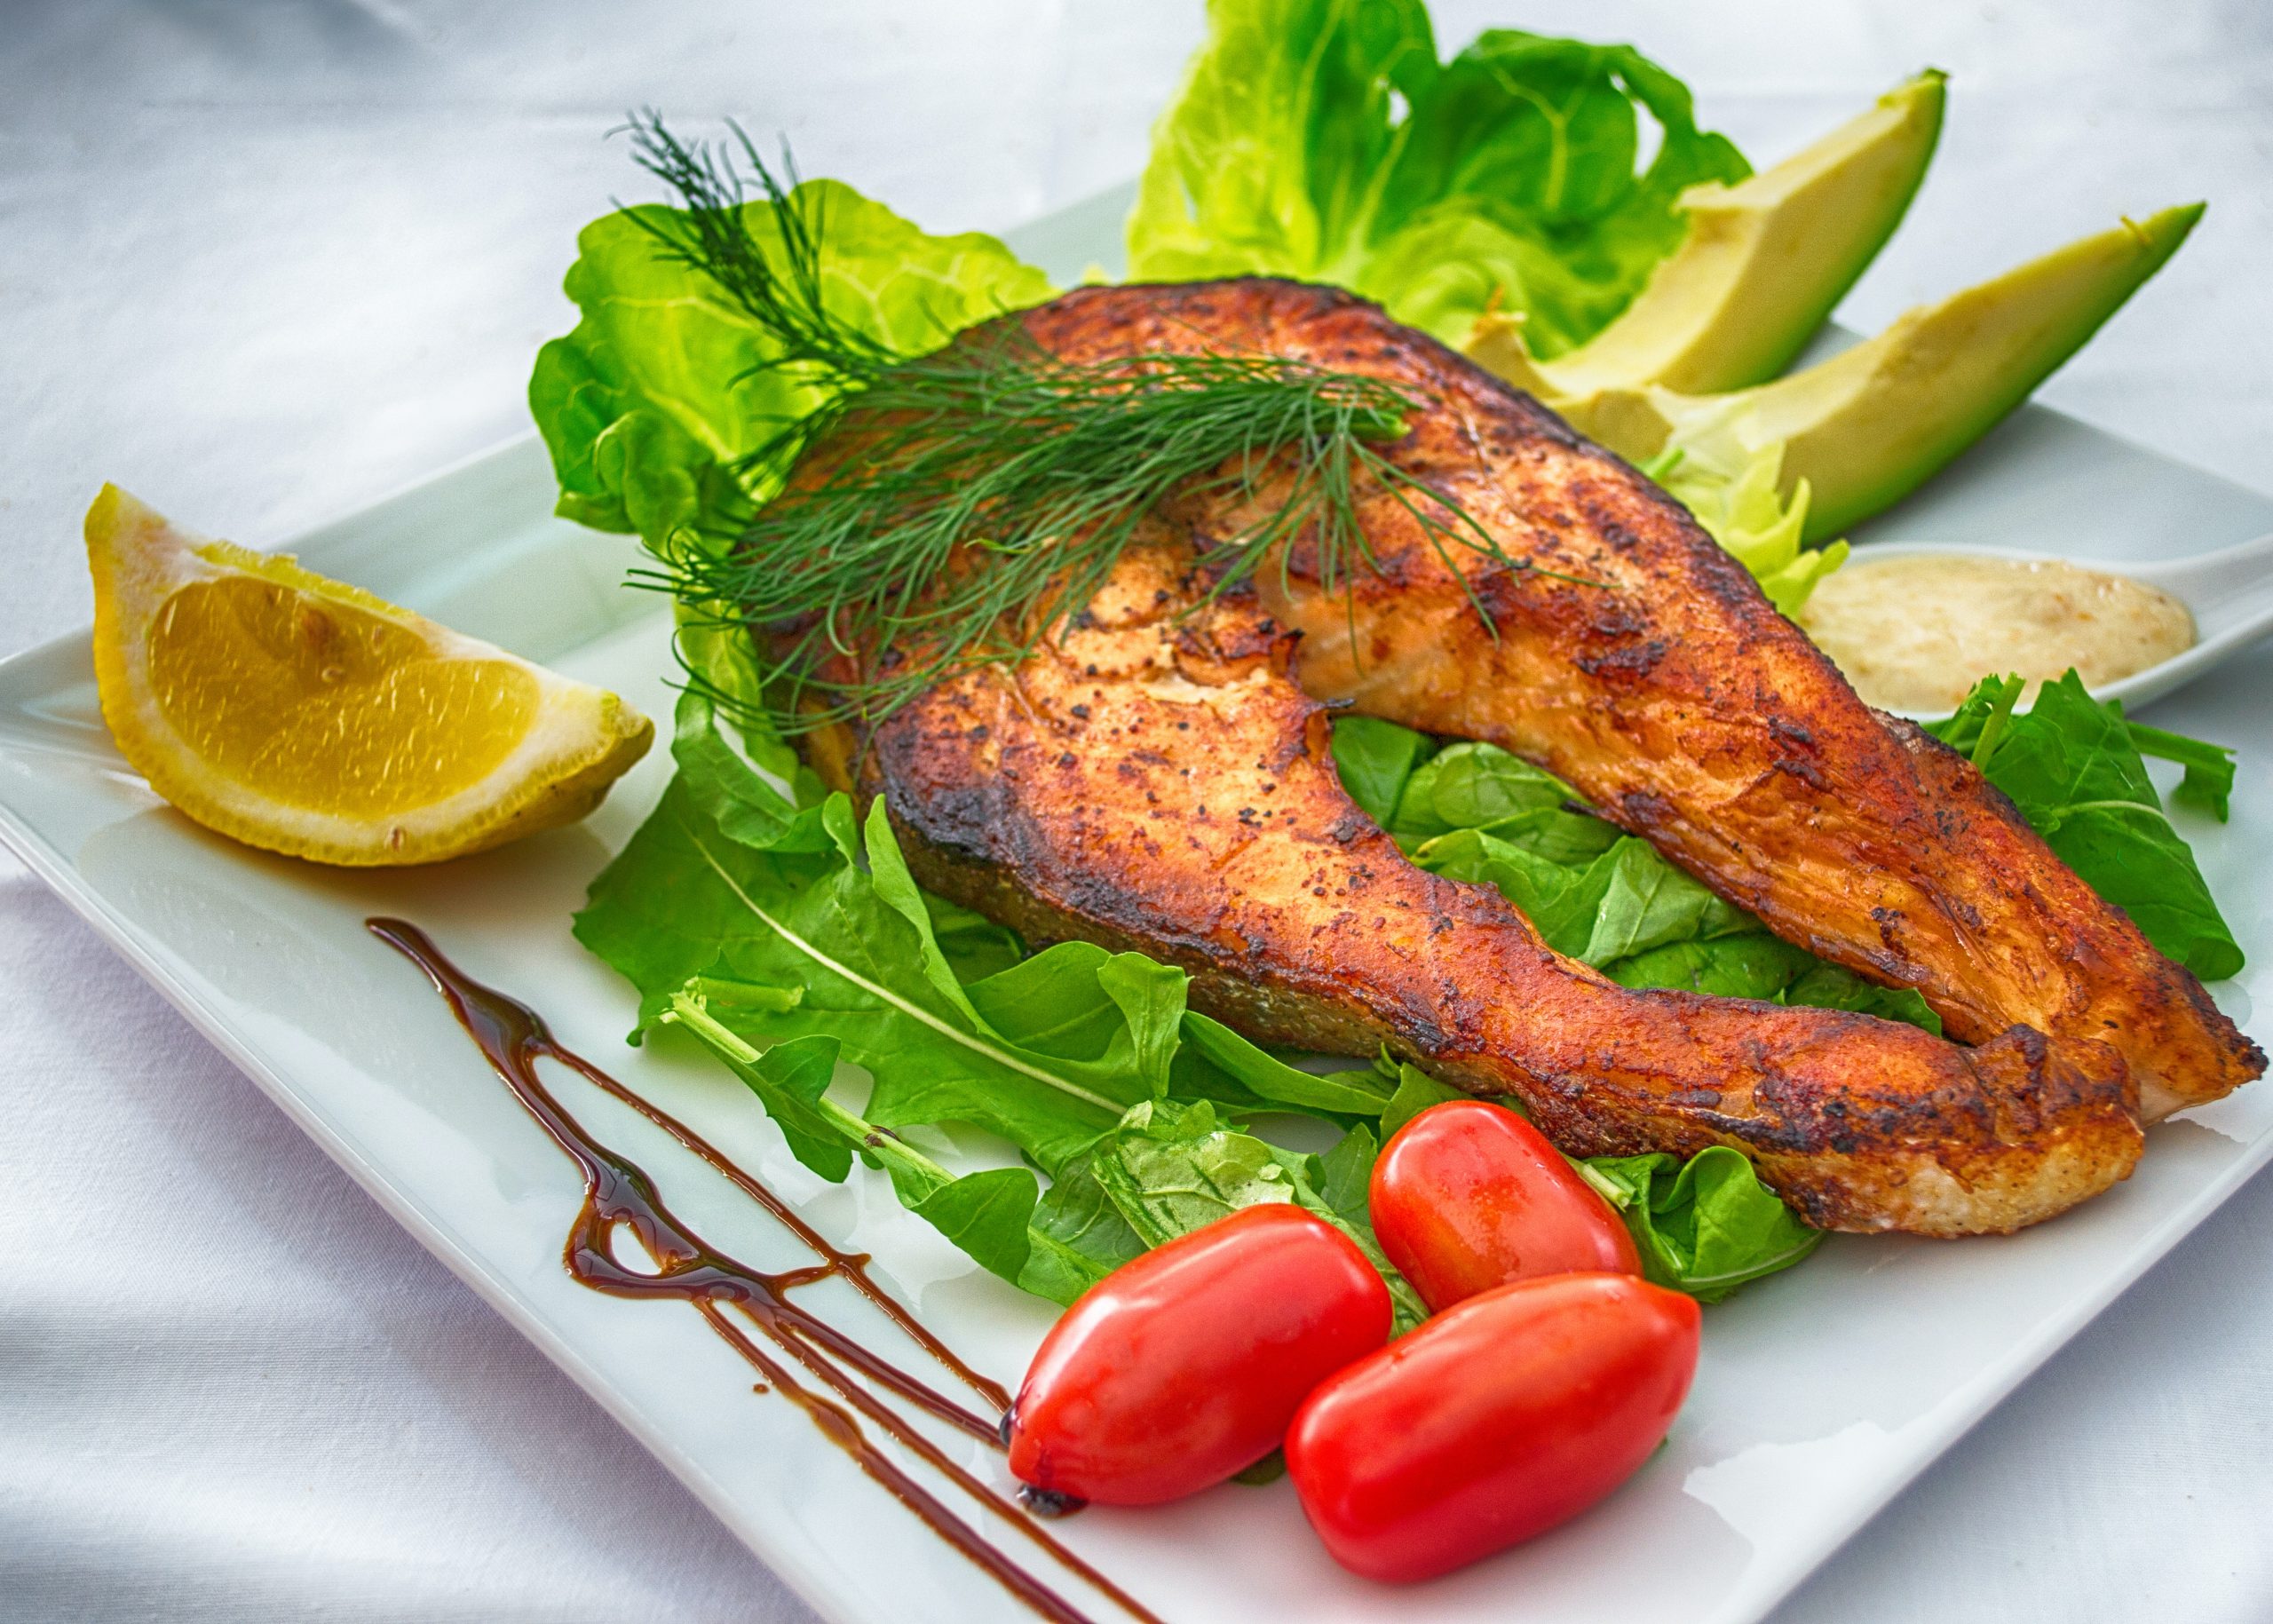 Food for high blood pressure- Salmon